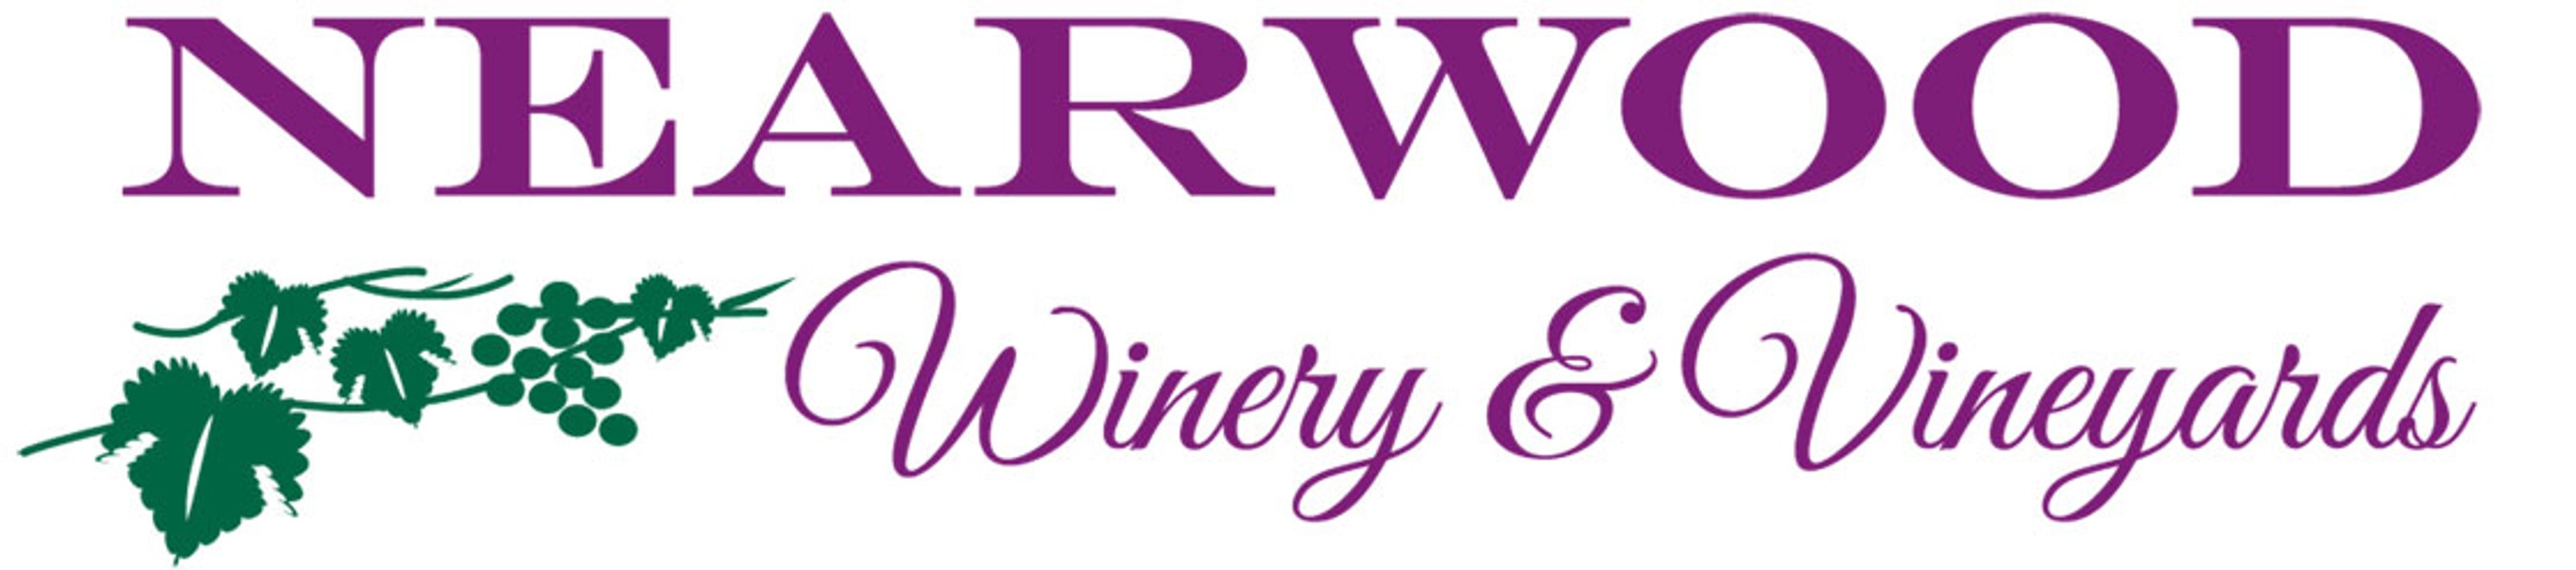 Brand for Nearwood Winery & Vineyards